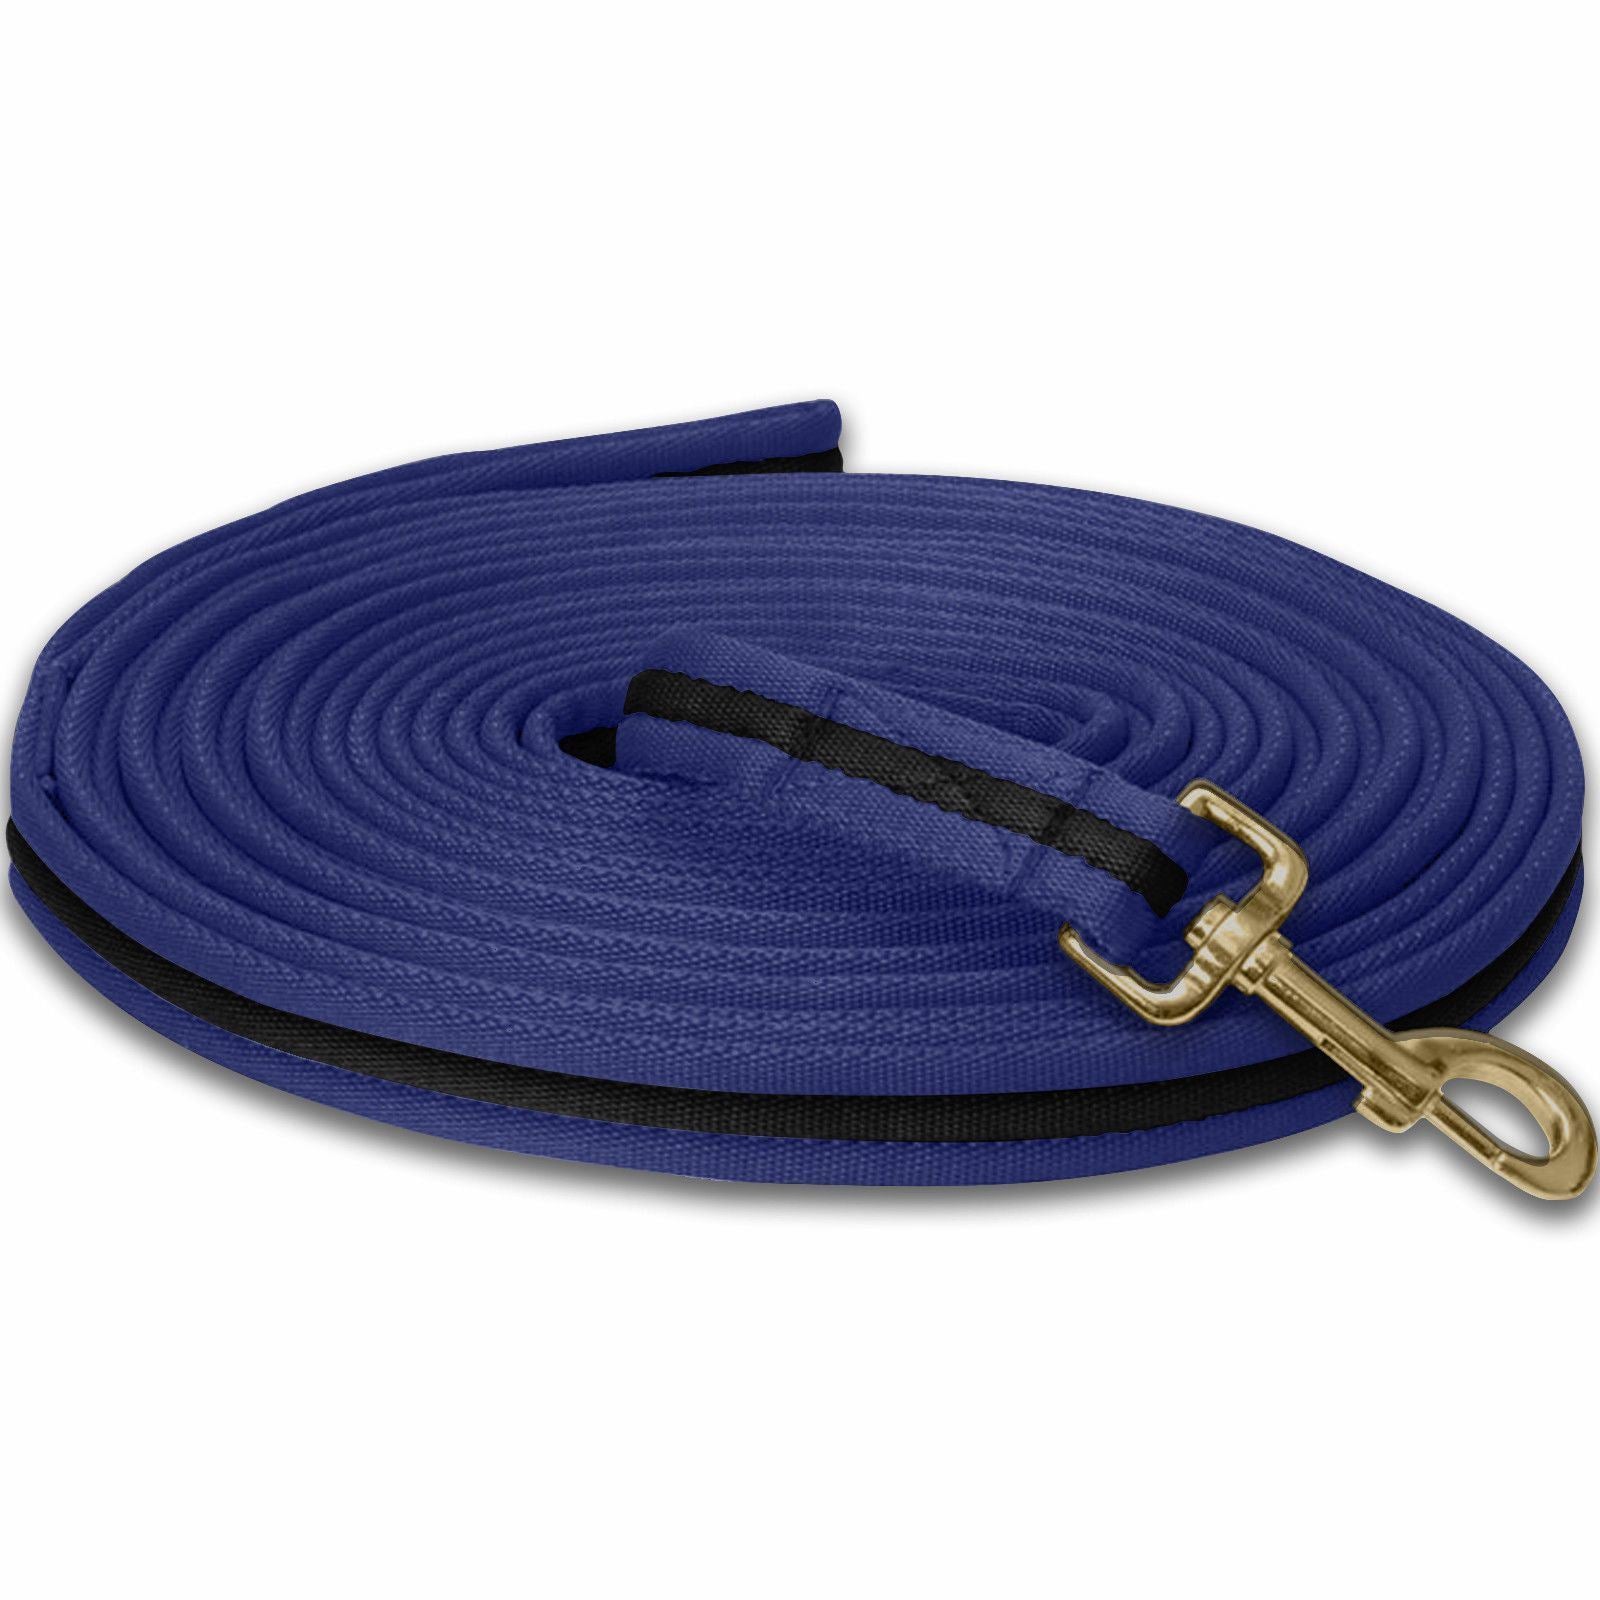 8 Metre Soft Padded Lunging Rein Pony Horse Training Long Lunge Line 22 Colours